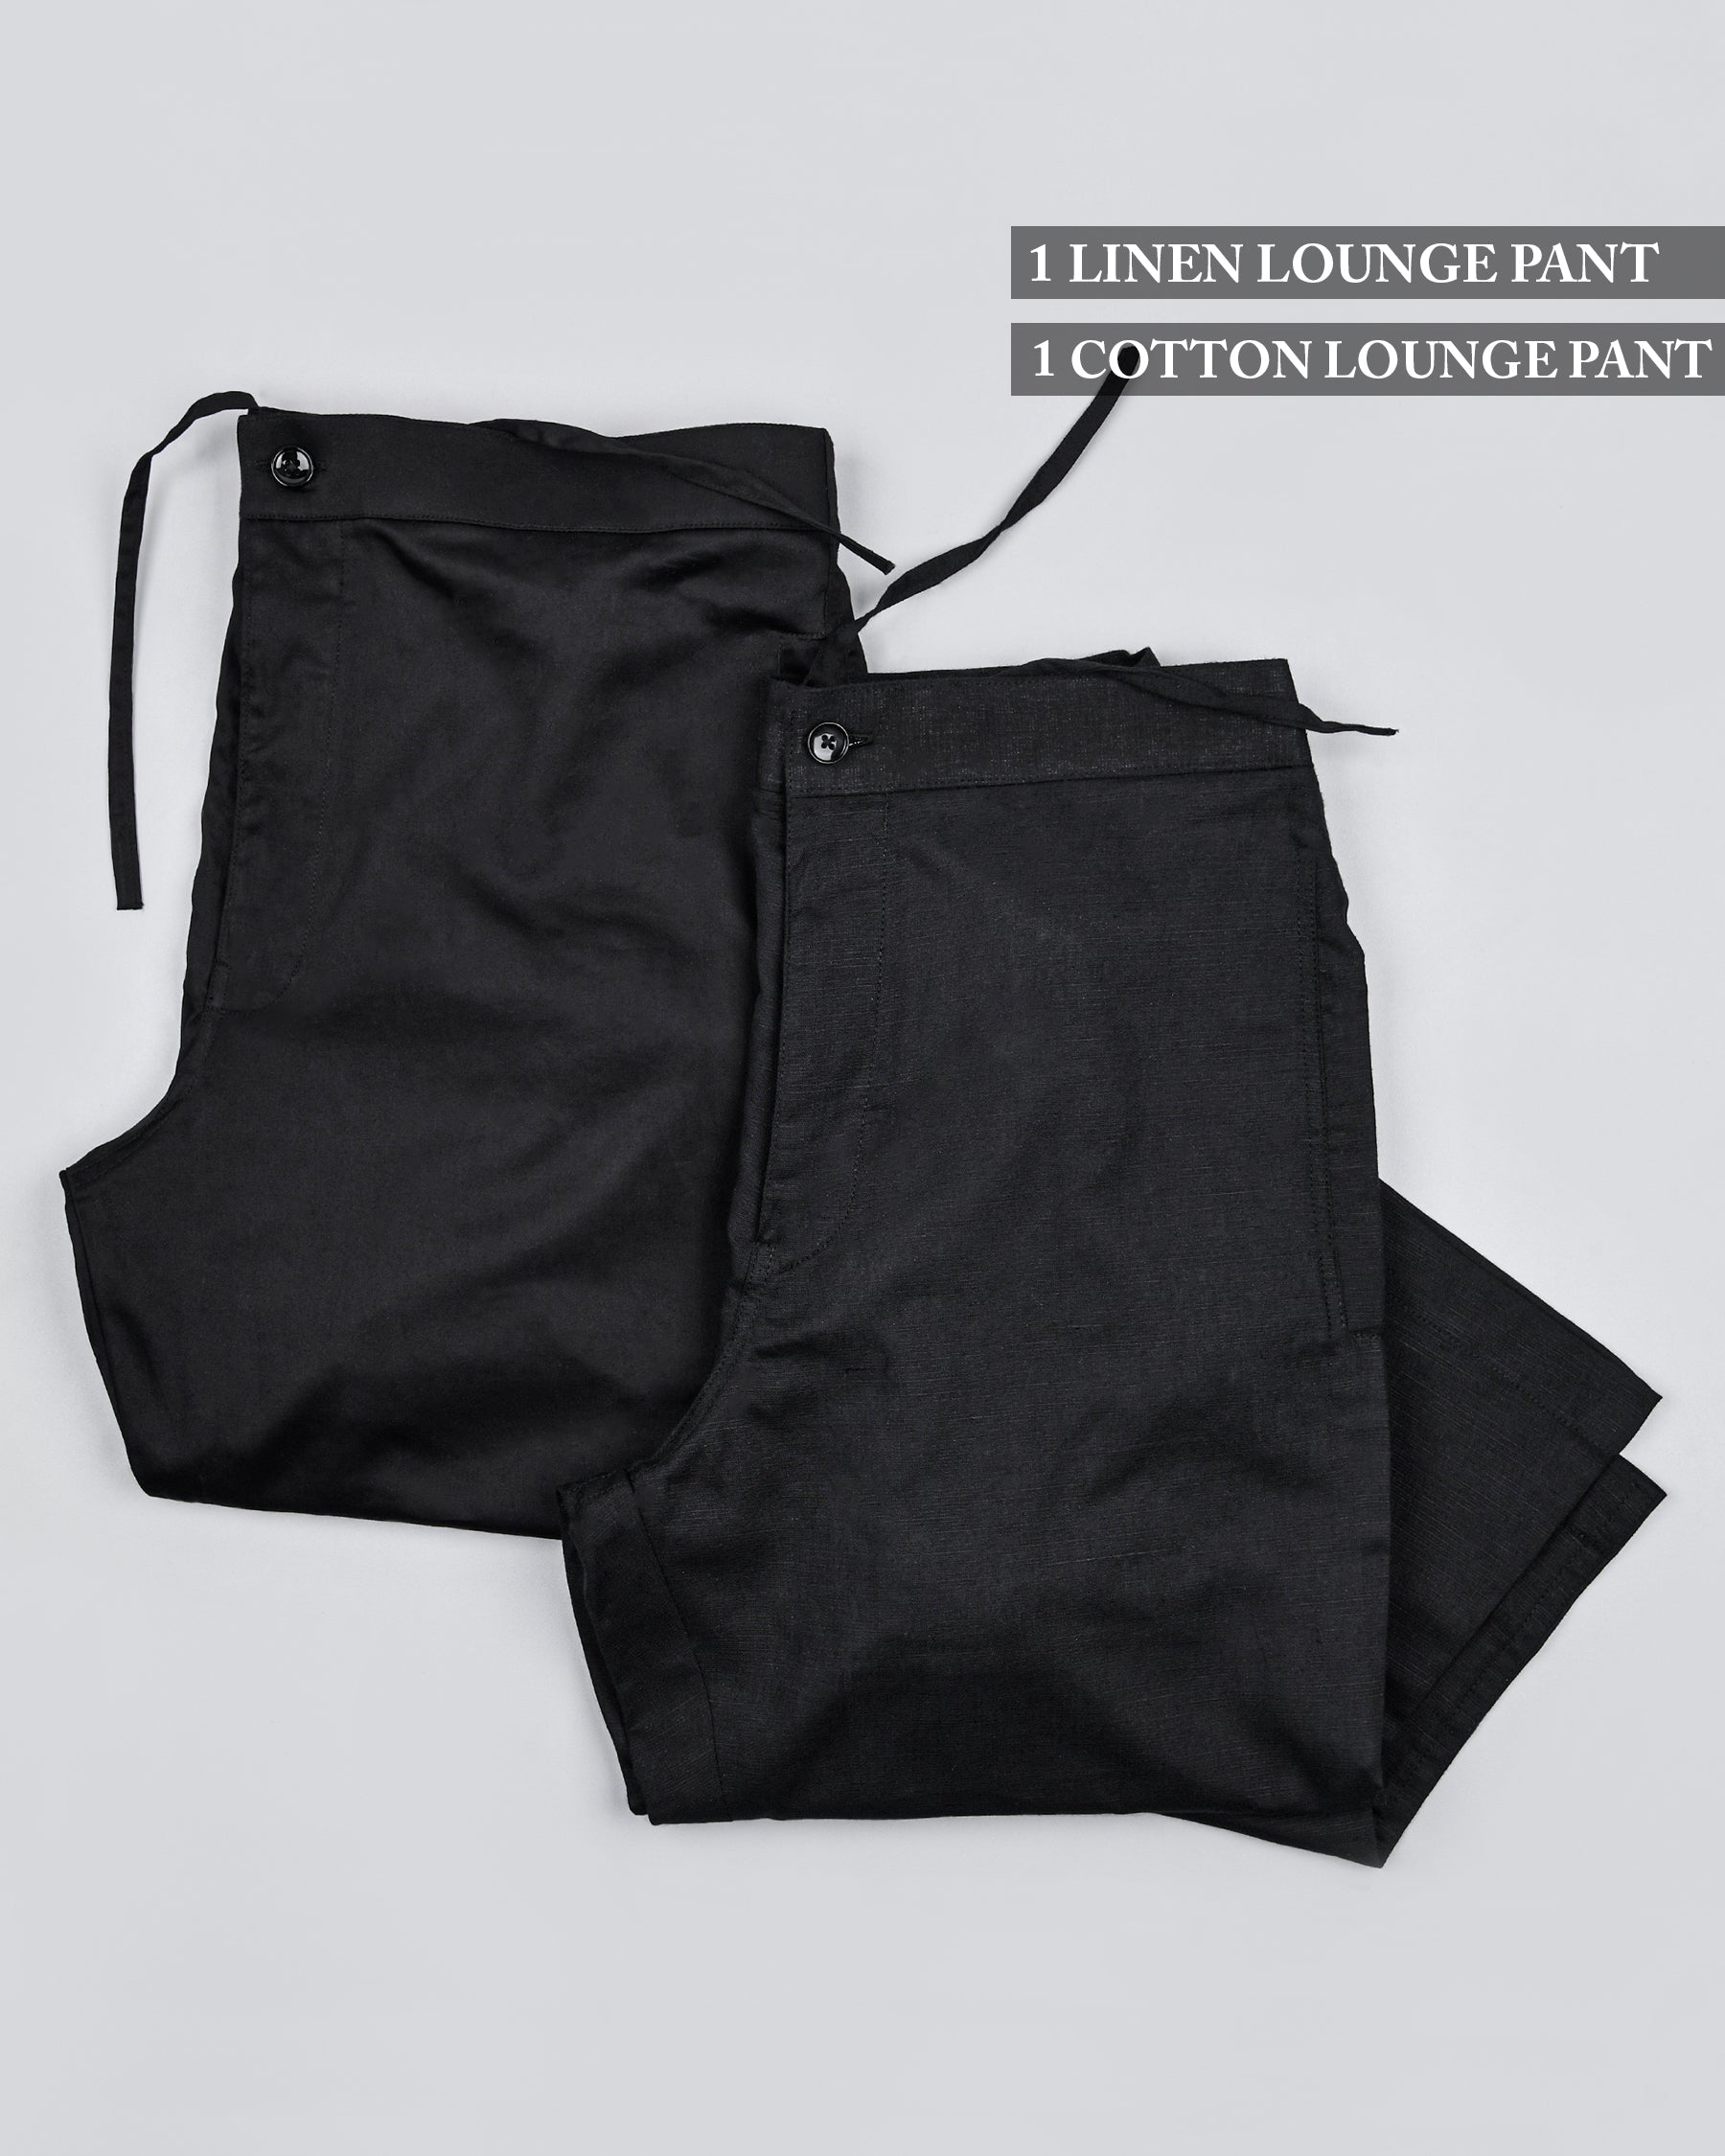 One Black Linen and One Black Cotton Lounge Pants LP017-42, LP017-28, LP017-32, LP017-40, LP017-36, LP017-38, LP017-44, LP017-30, LP017-34